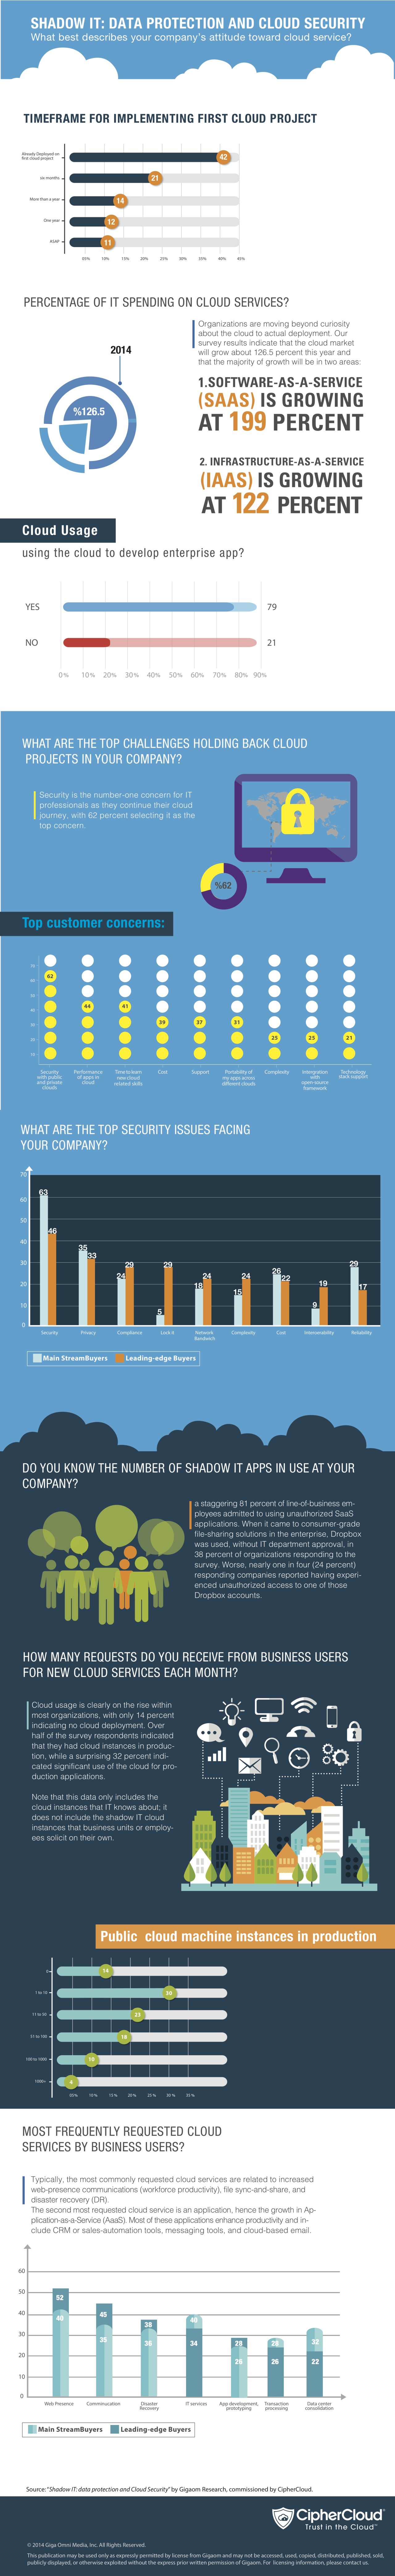 The popularity of cloud services and the problems with data protection